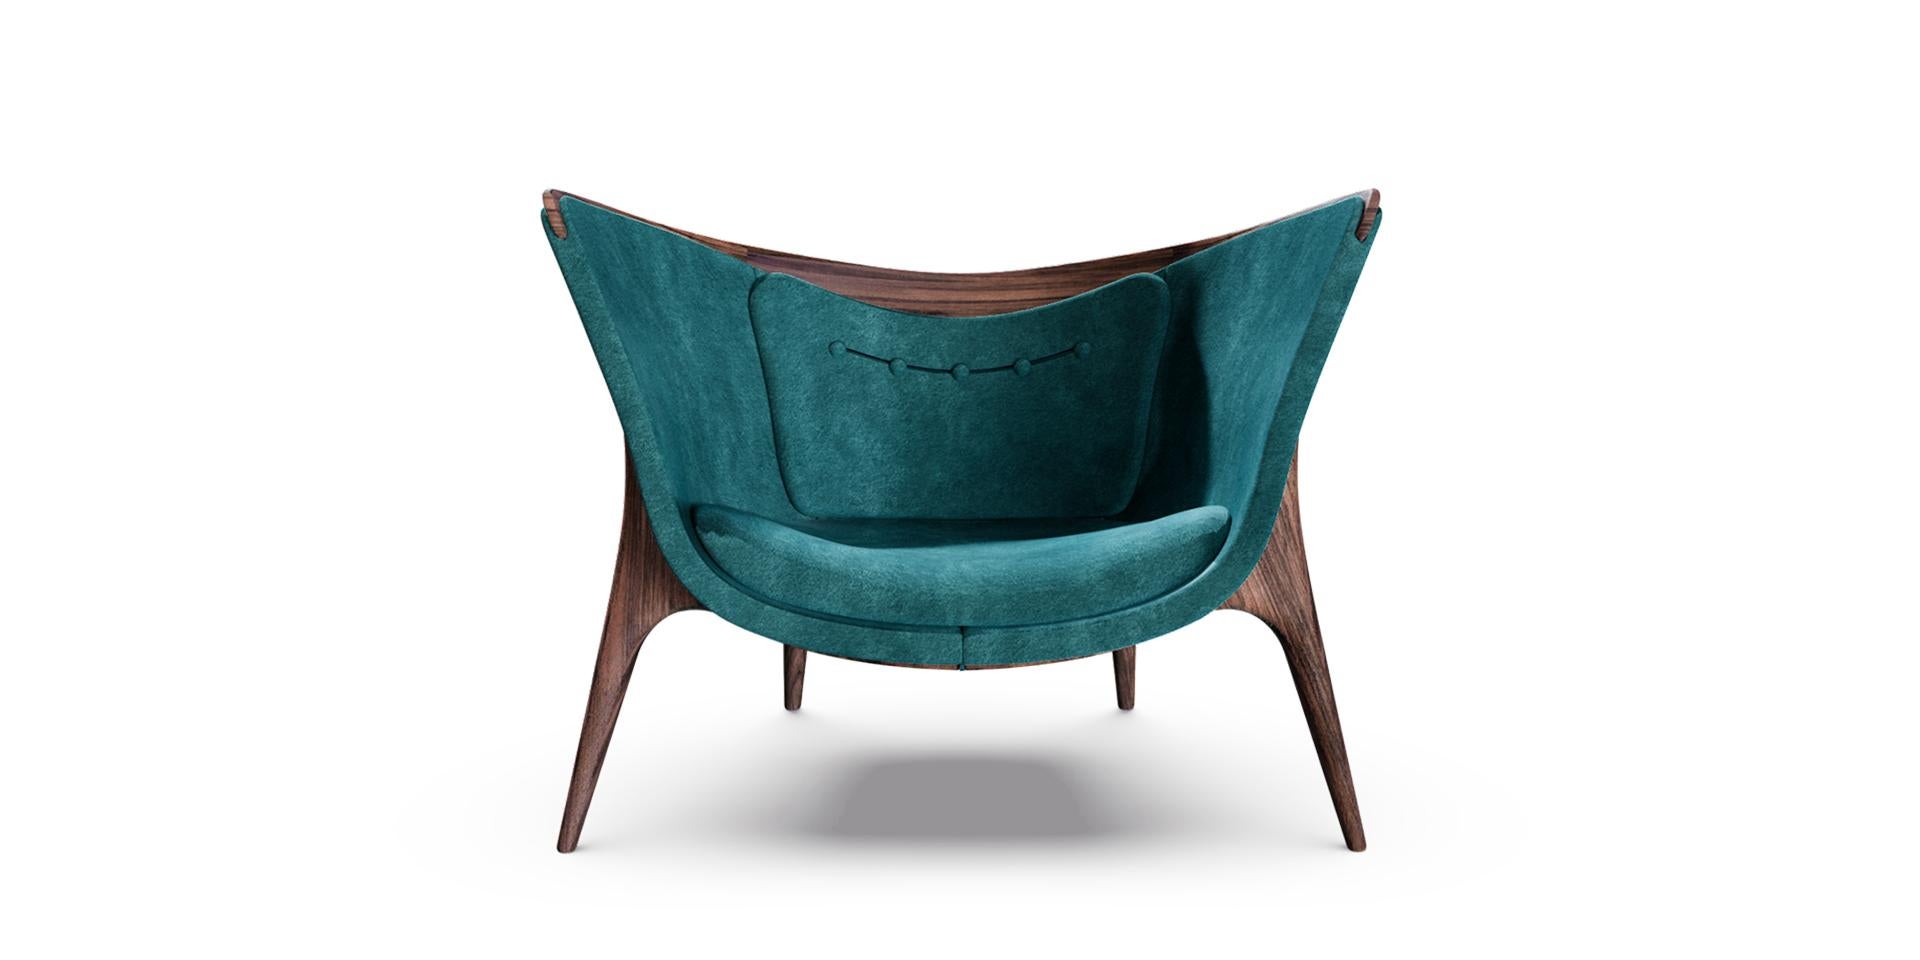 The proud head and rich shapes of the Arabian horse inspired the creation of the exuberant HISSAN ARABI armchair. Enveloping, fluid and sensual shapes for an upholstered and refined comfort, with the lightness highlighted by the walnut wood